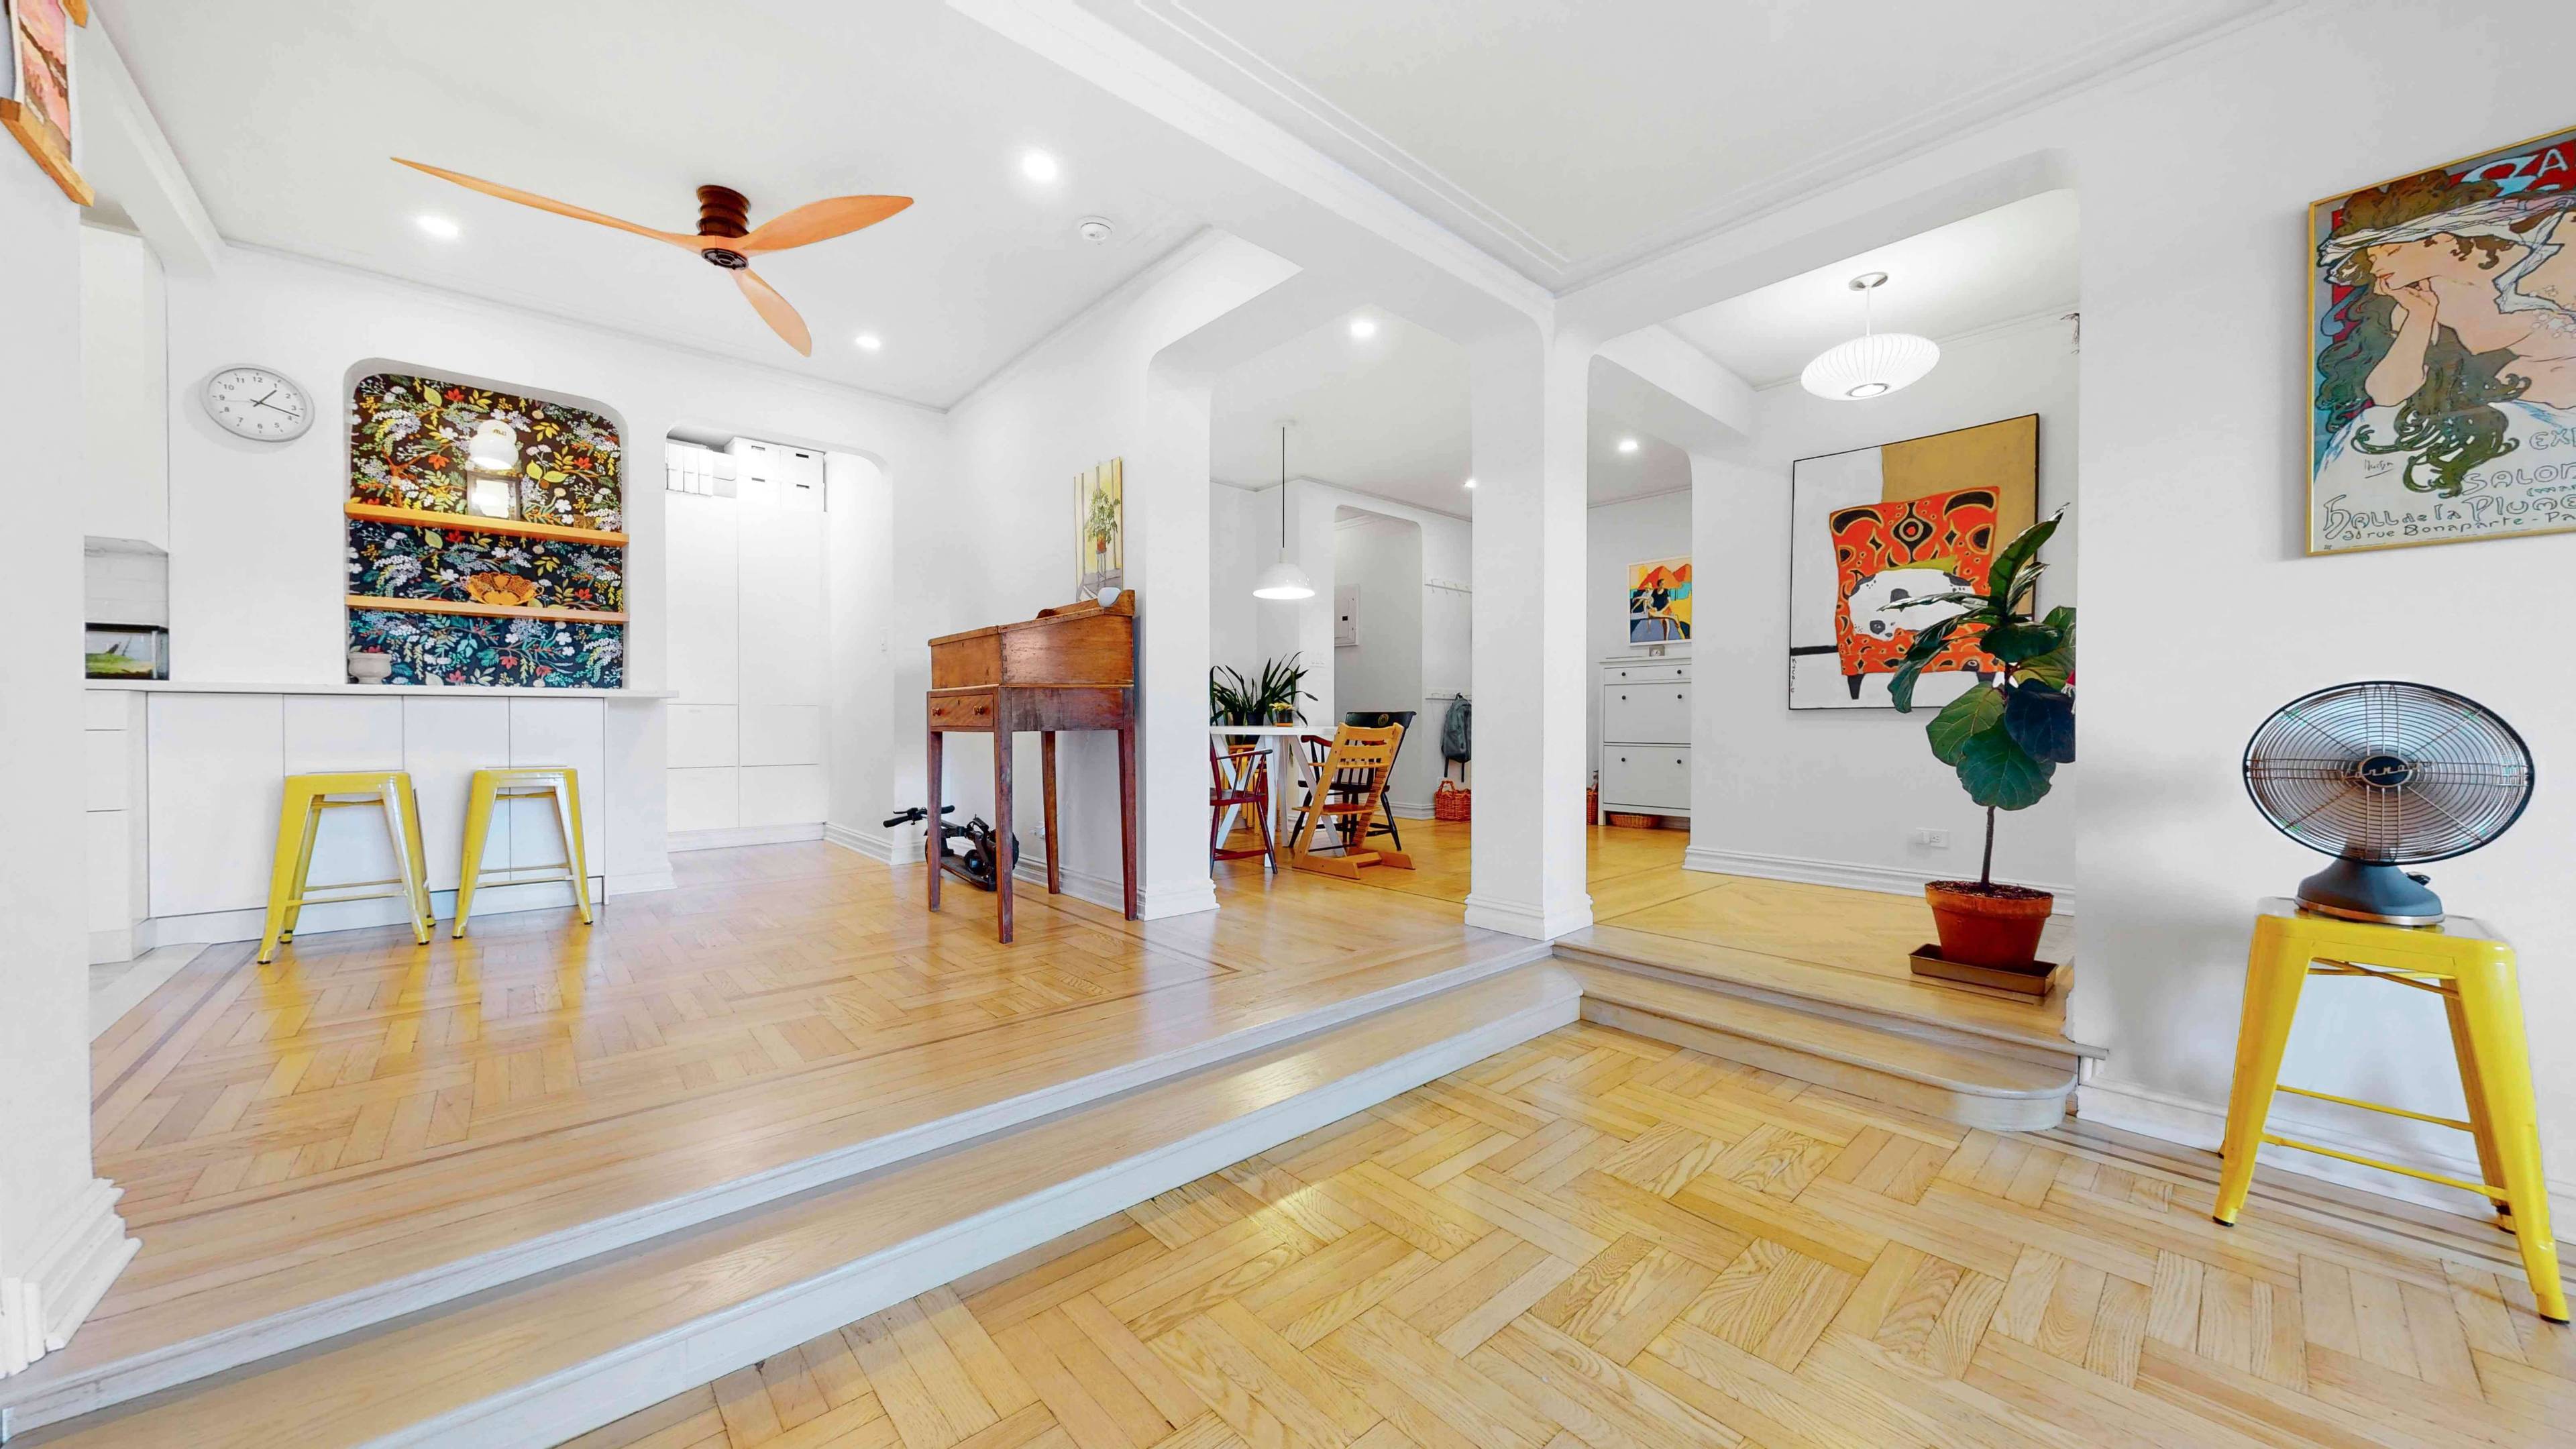 Located on a leafy street at the edge of Isham Park is a huge and sunny residence with three bedrooms, two full baths, and bonus living spaces.